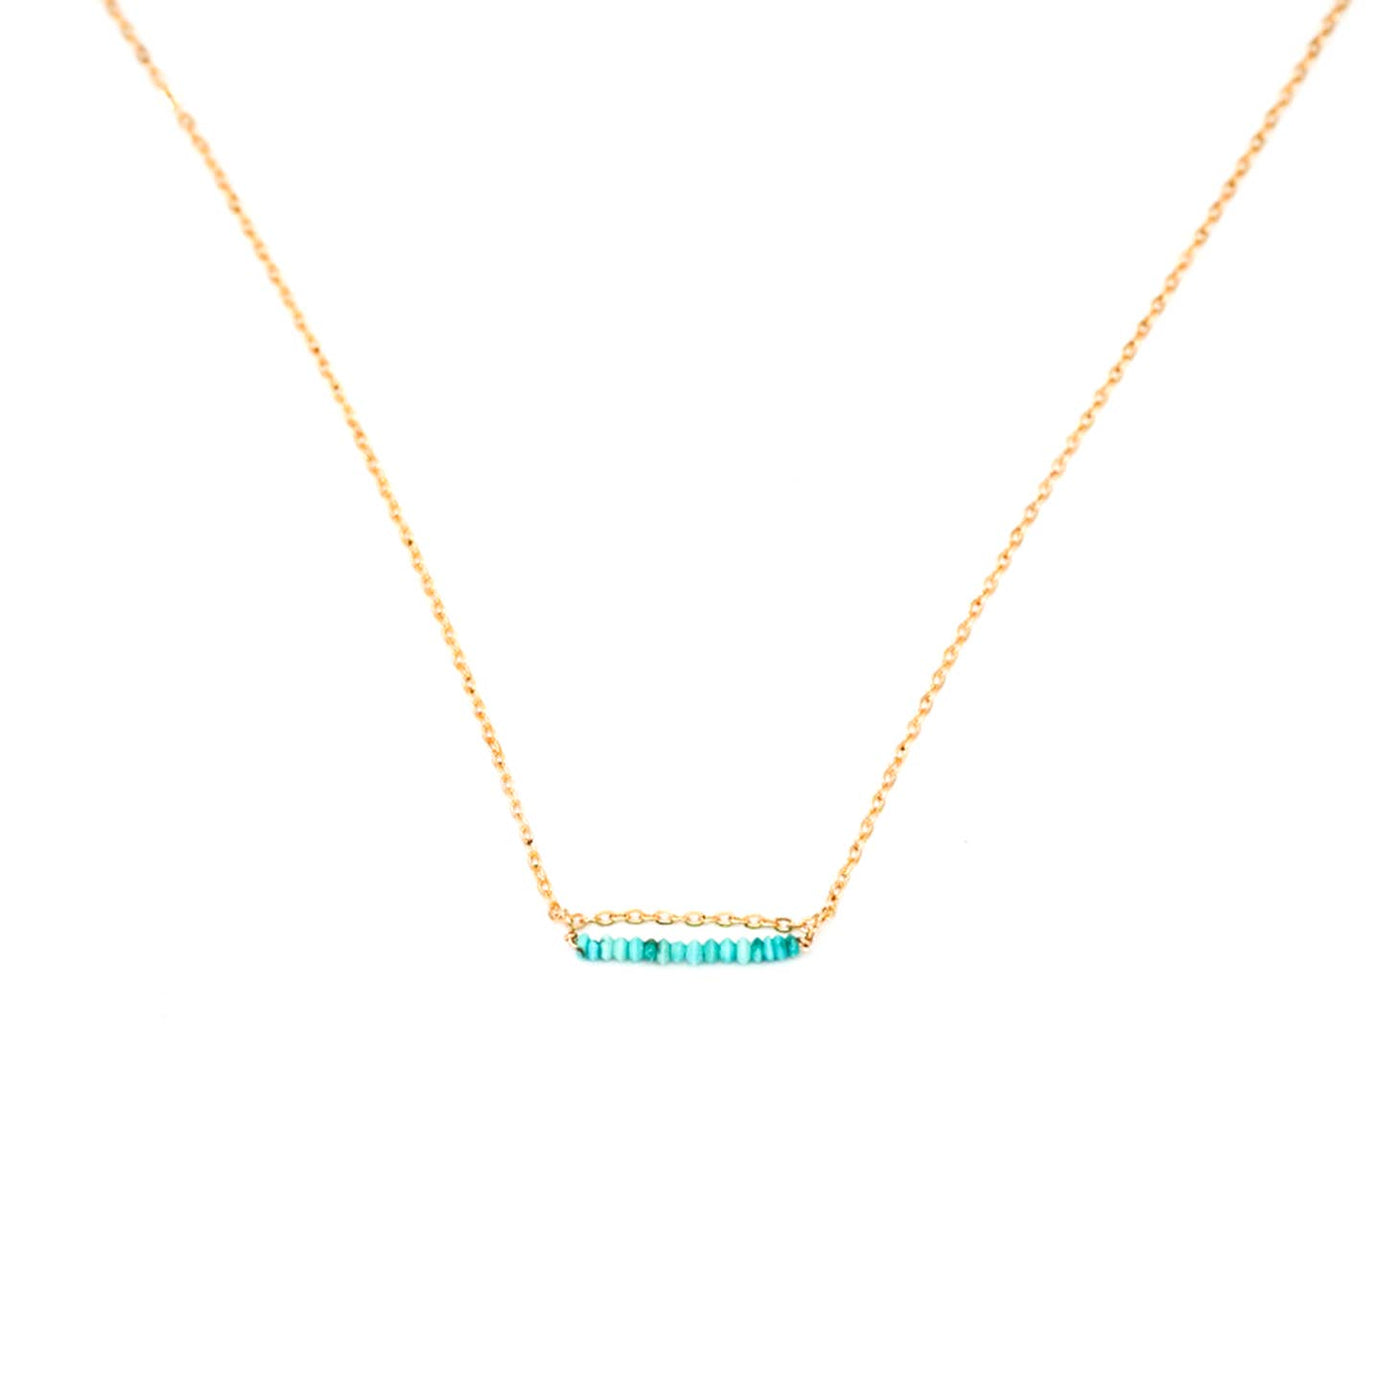 Tiny turquoise necklace